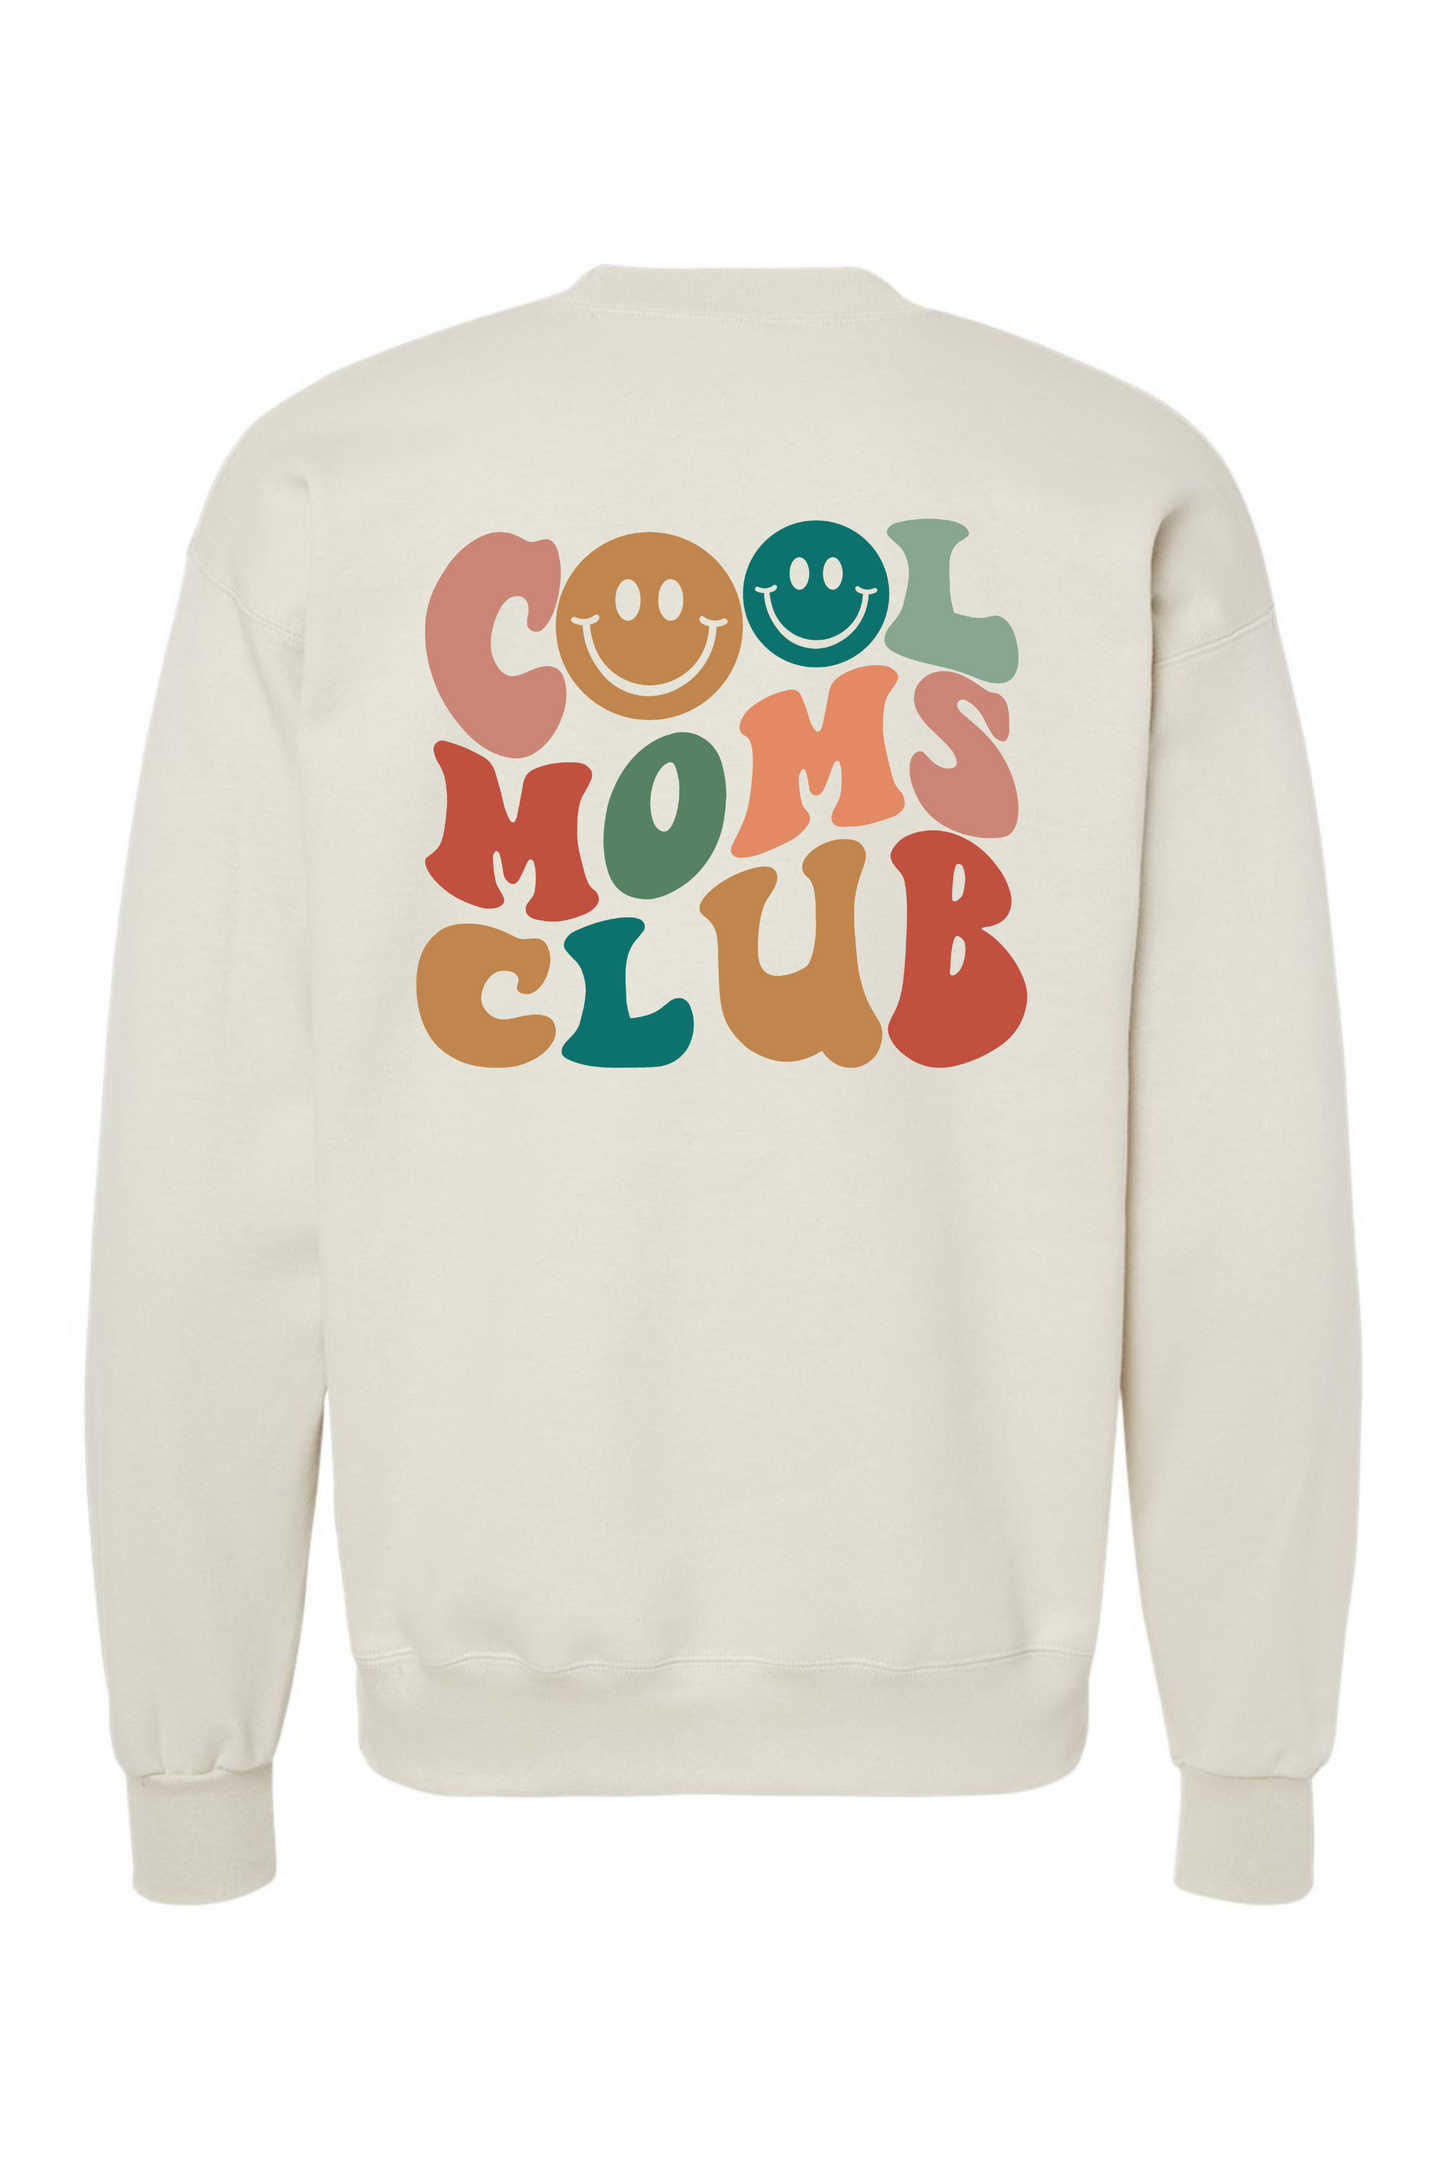 Cool Moms Club | Adult Crewneck-Adult Crewneck-Sister Shirts-Sister Shirts, Cute & Custom Tees for Mama & Littles in Trussville, Alabama.